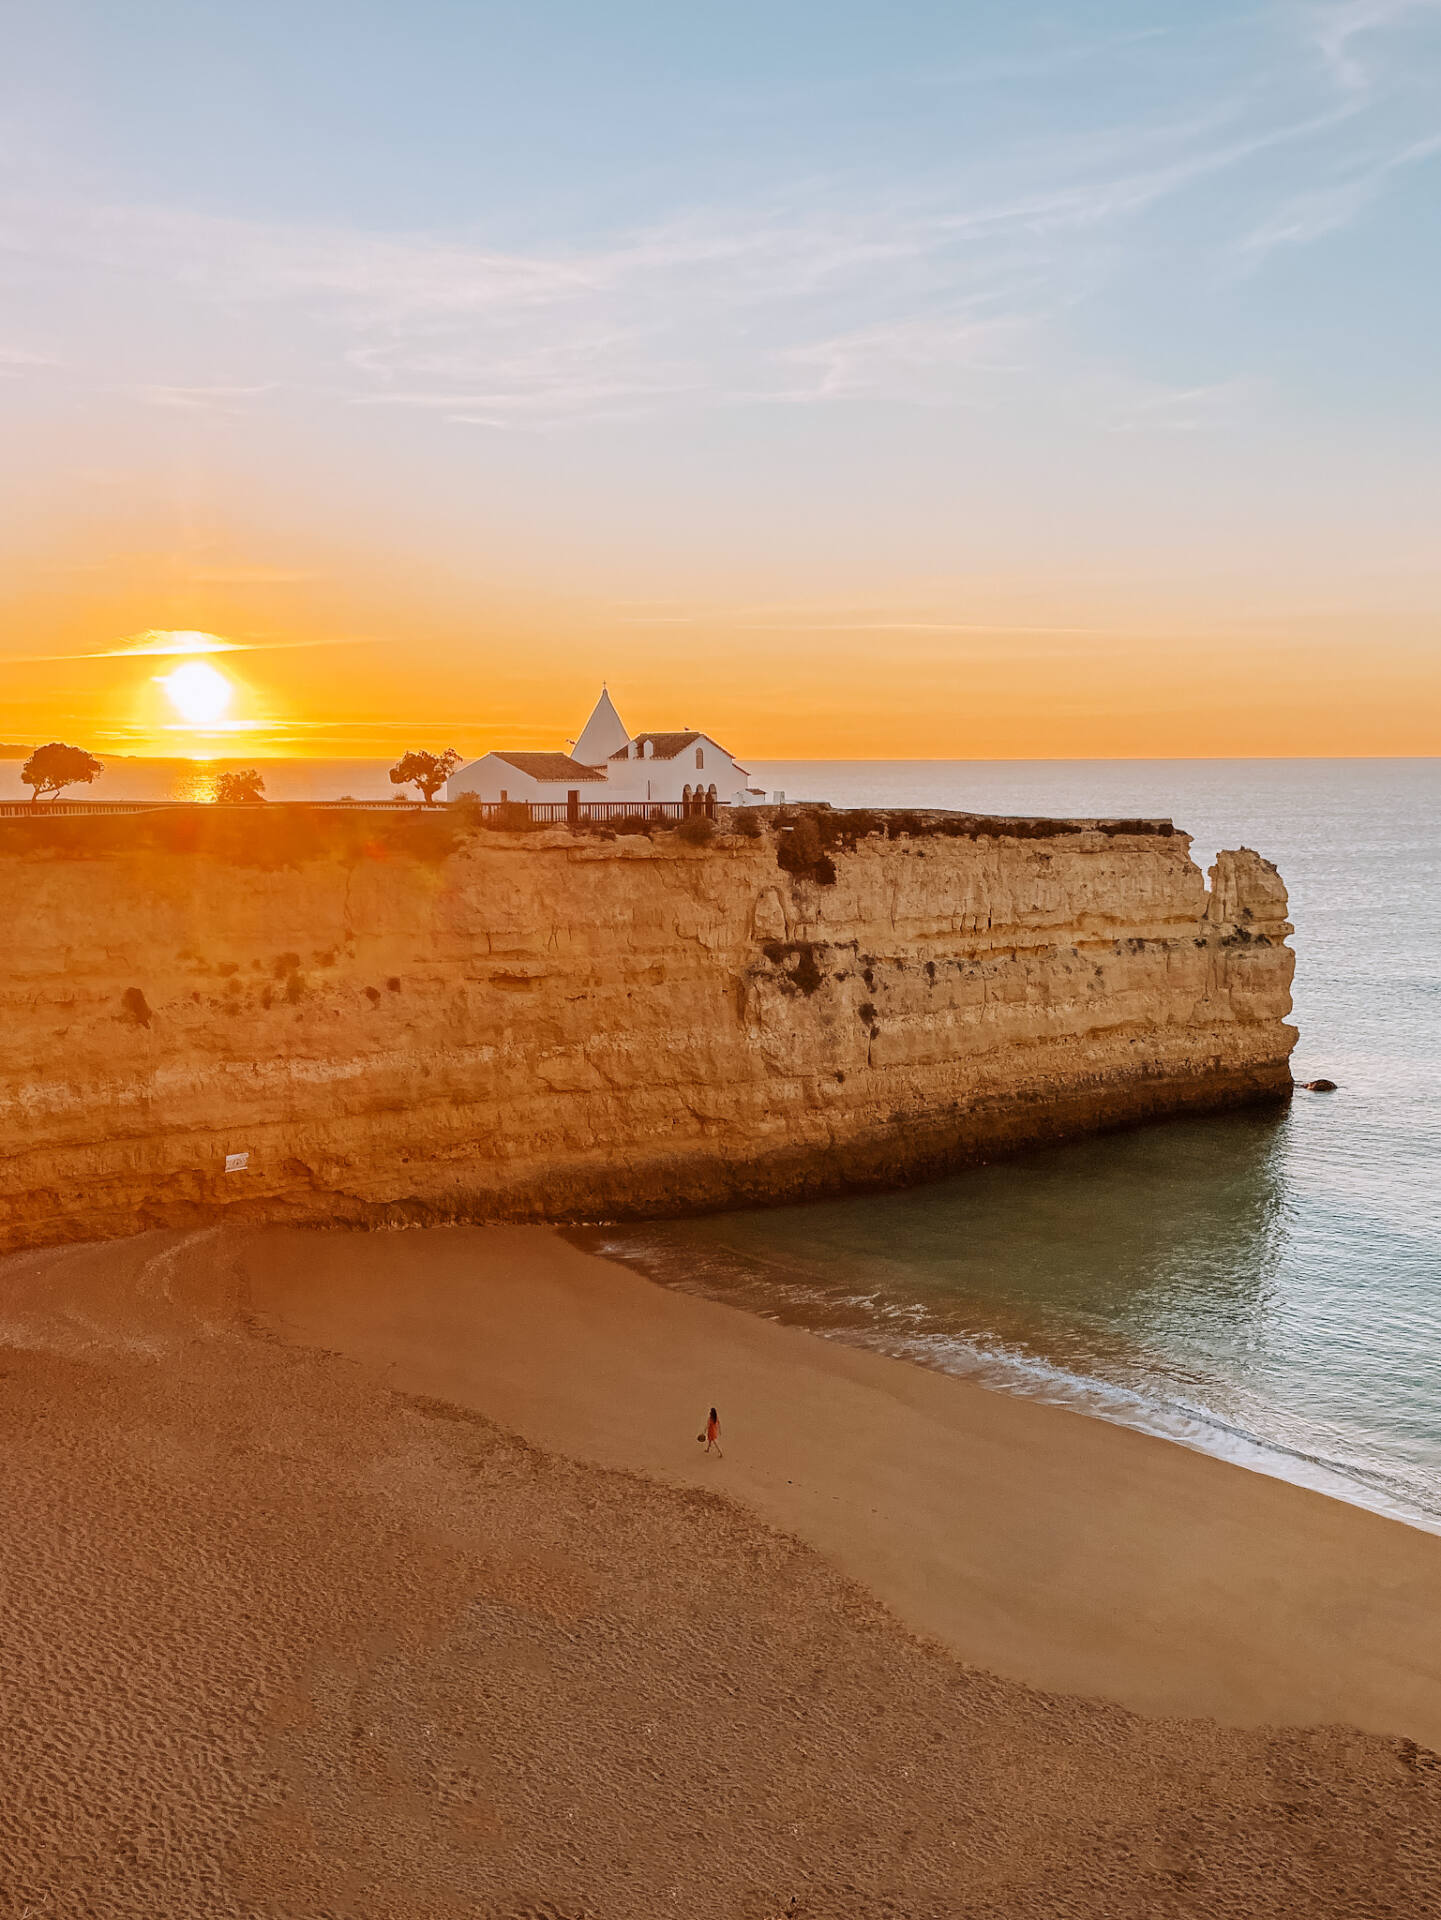 Most beautiful beaches in Algarve with cliffs